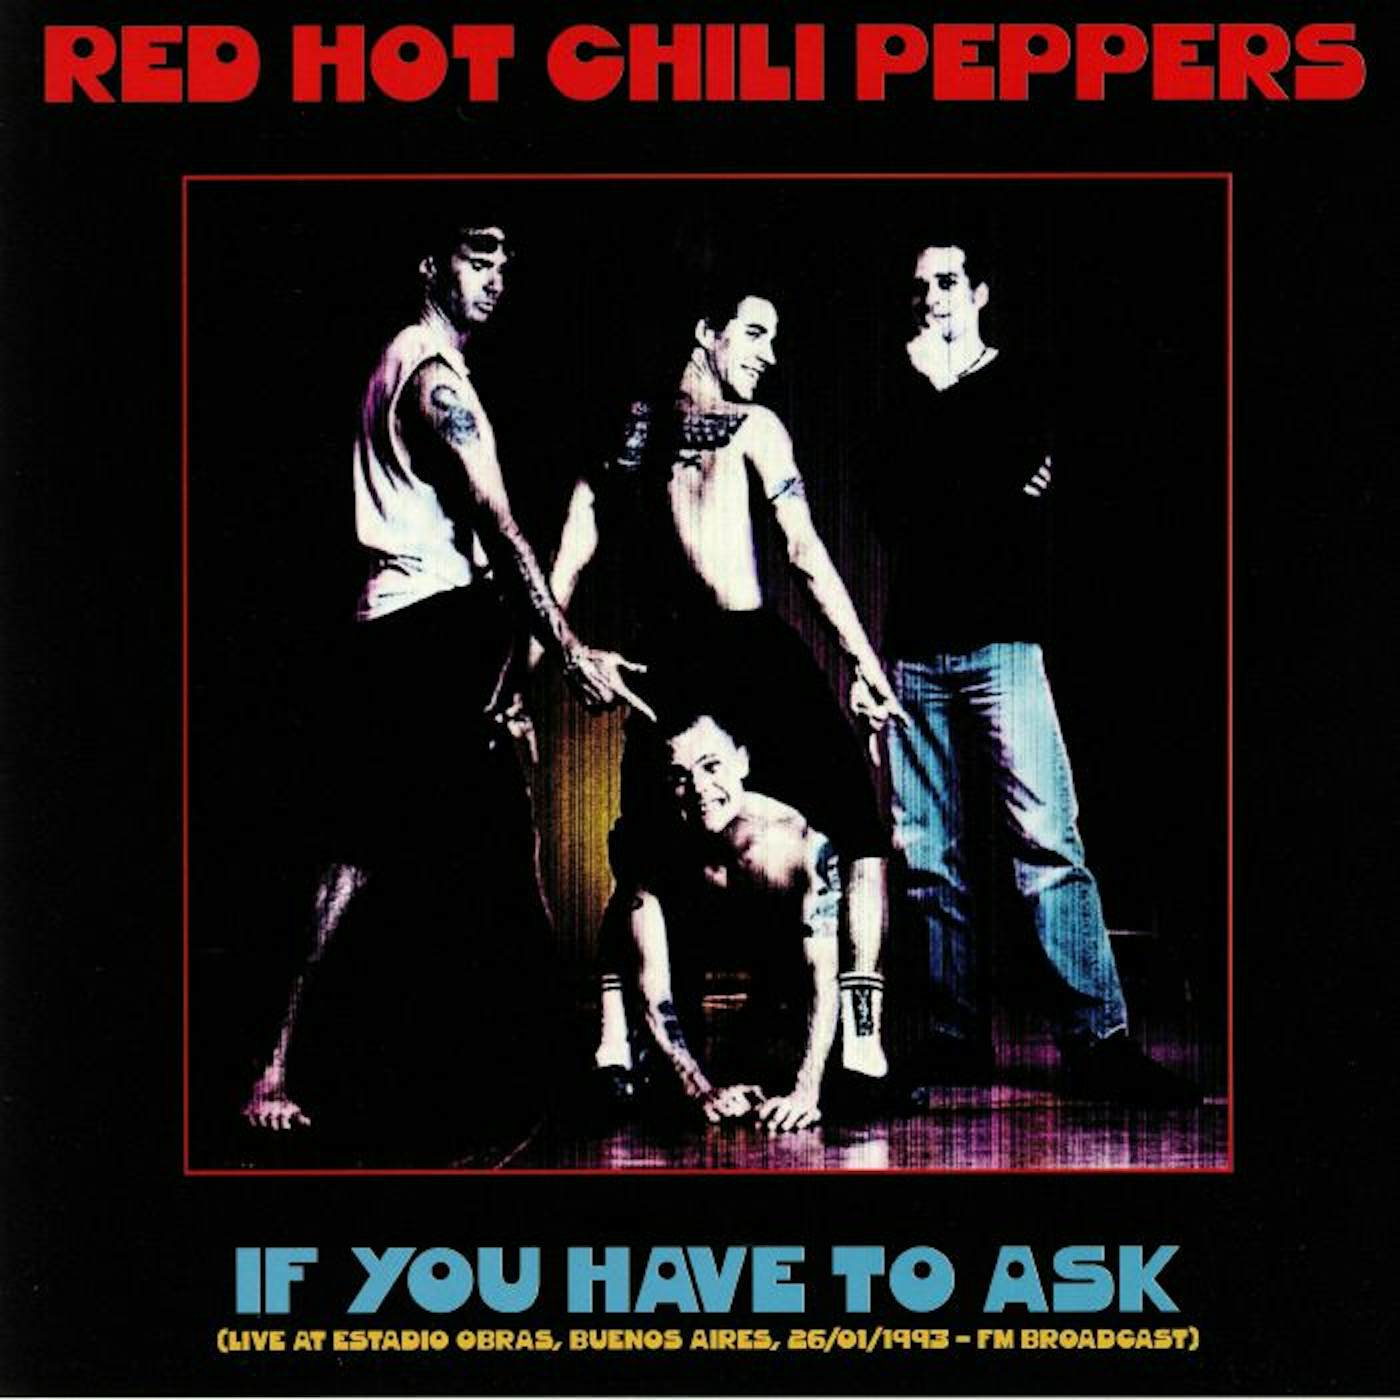 The Red Hot Chilli Peppers LP Vinyl Record - If You Have To Ask: Live At Estadio Obras. Bueneos Aires 26 / 01 / 19 93